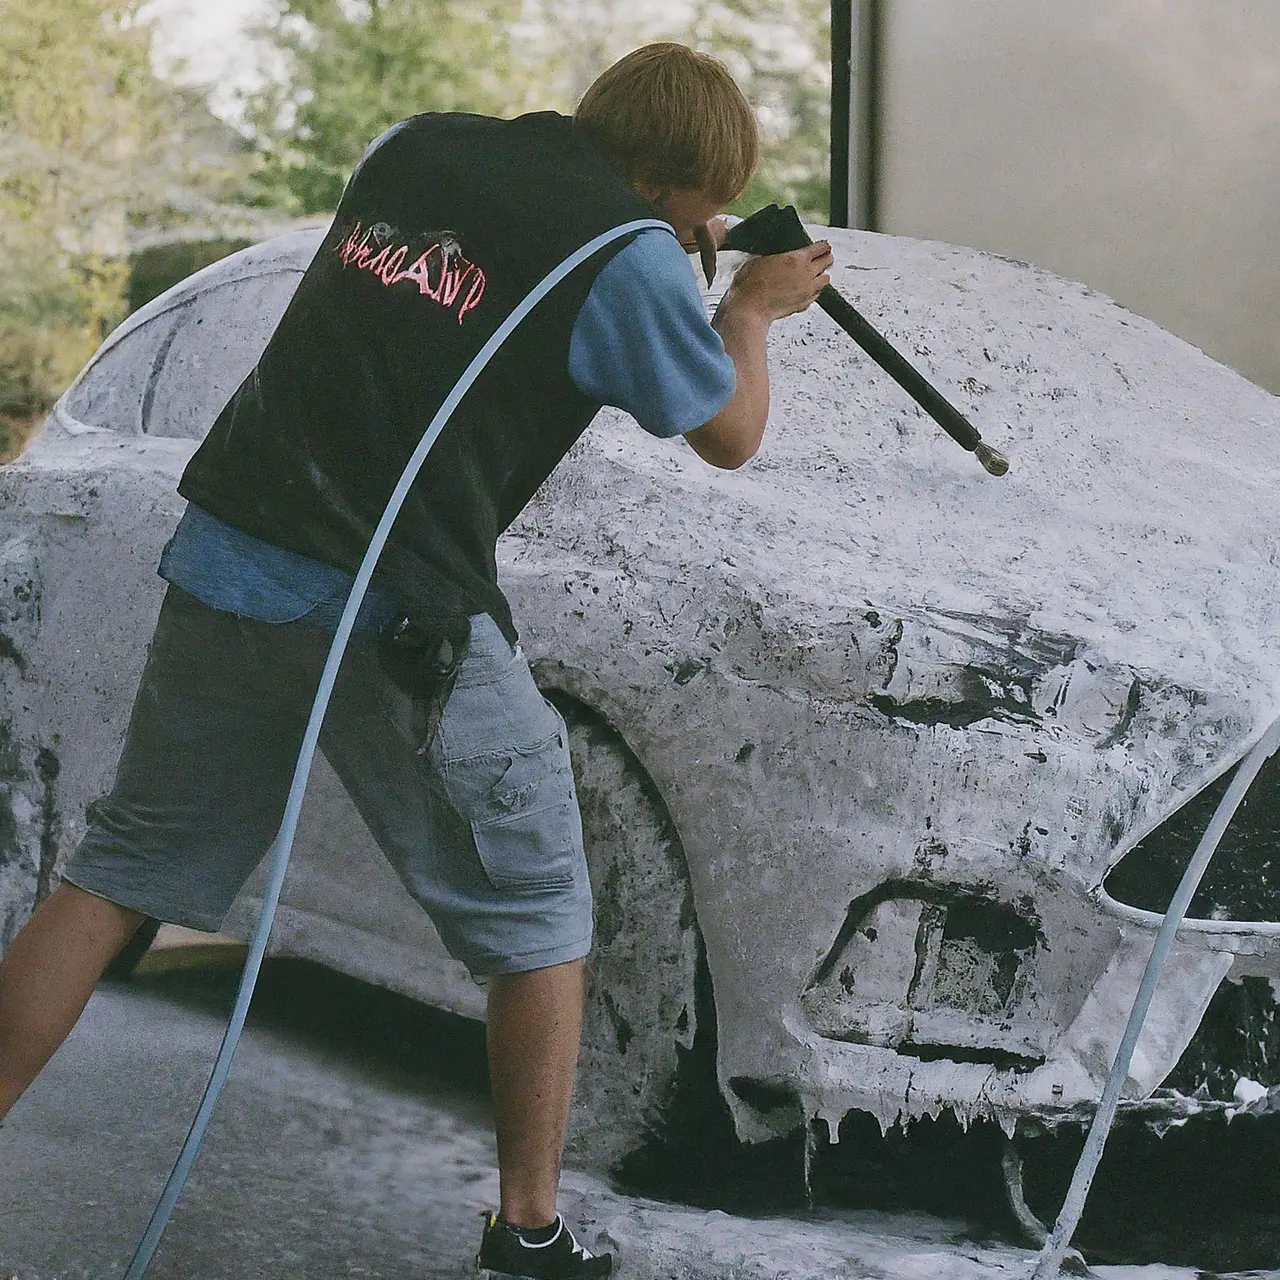 A foam cannon covering a car in soapy suds. 35mm stock photo